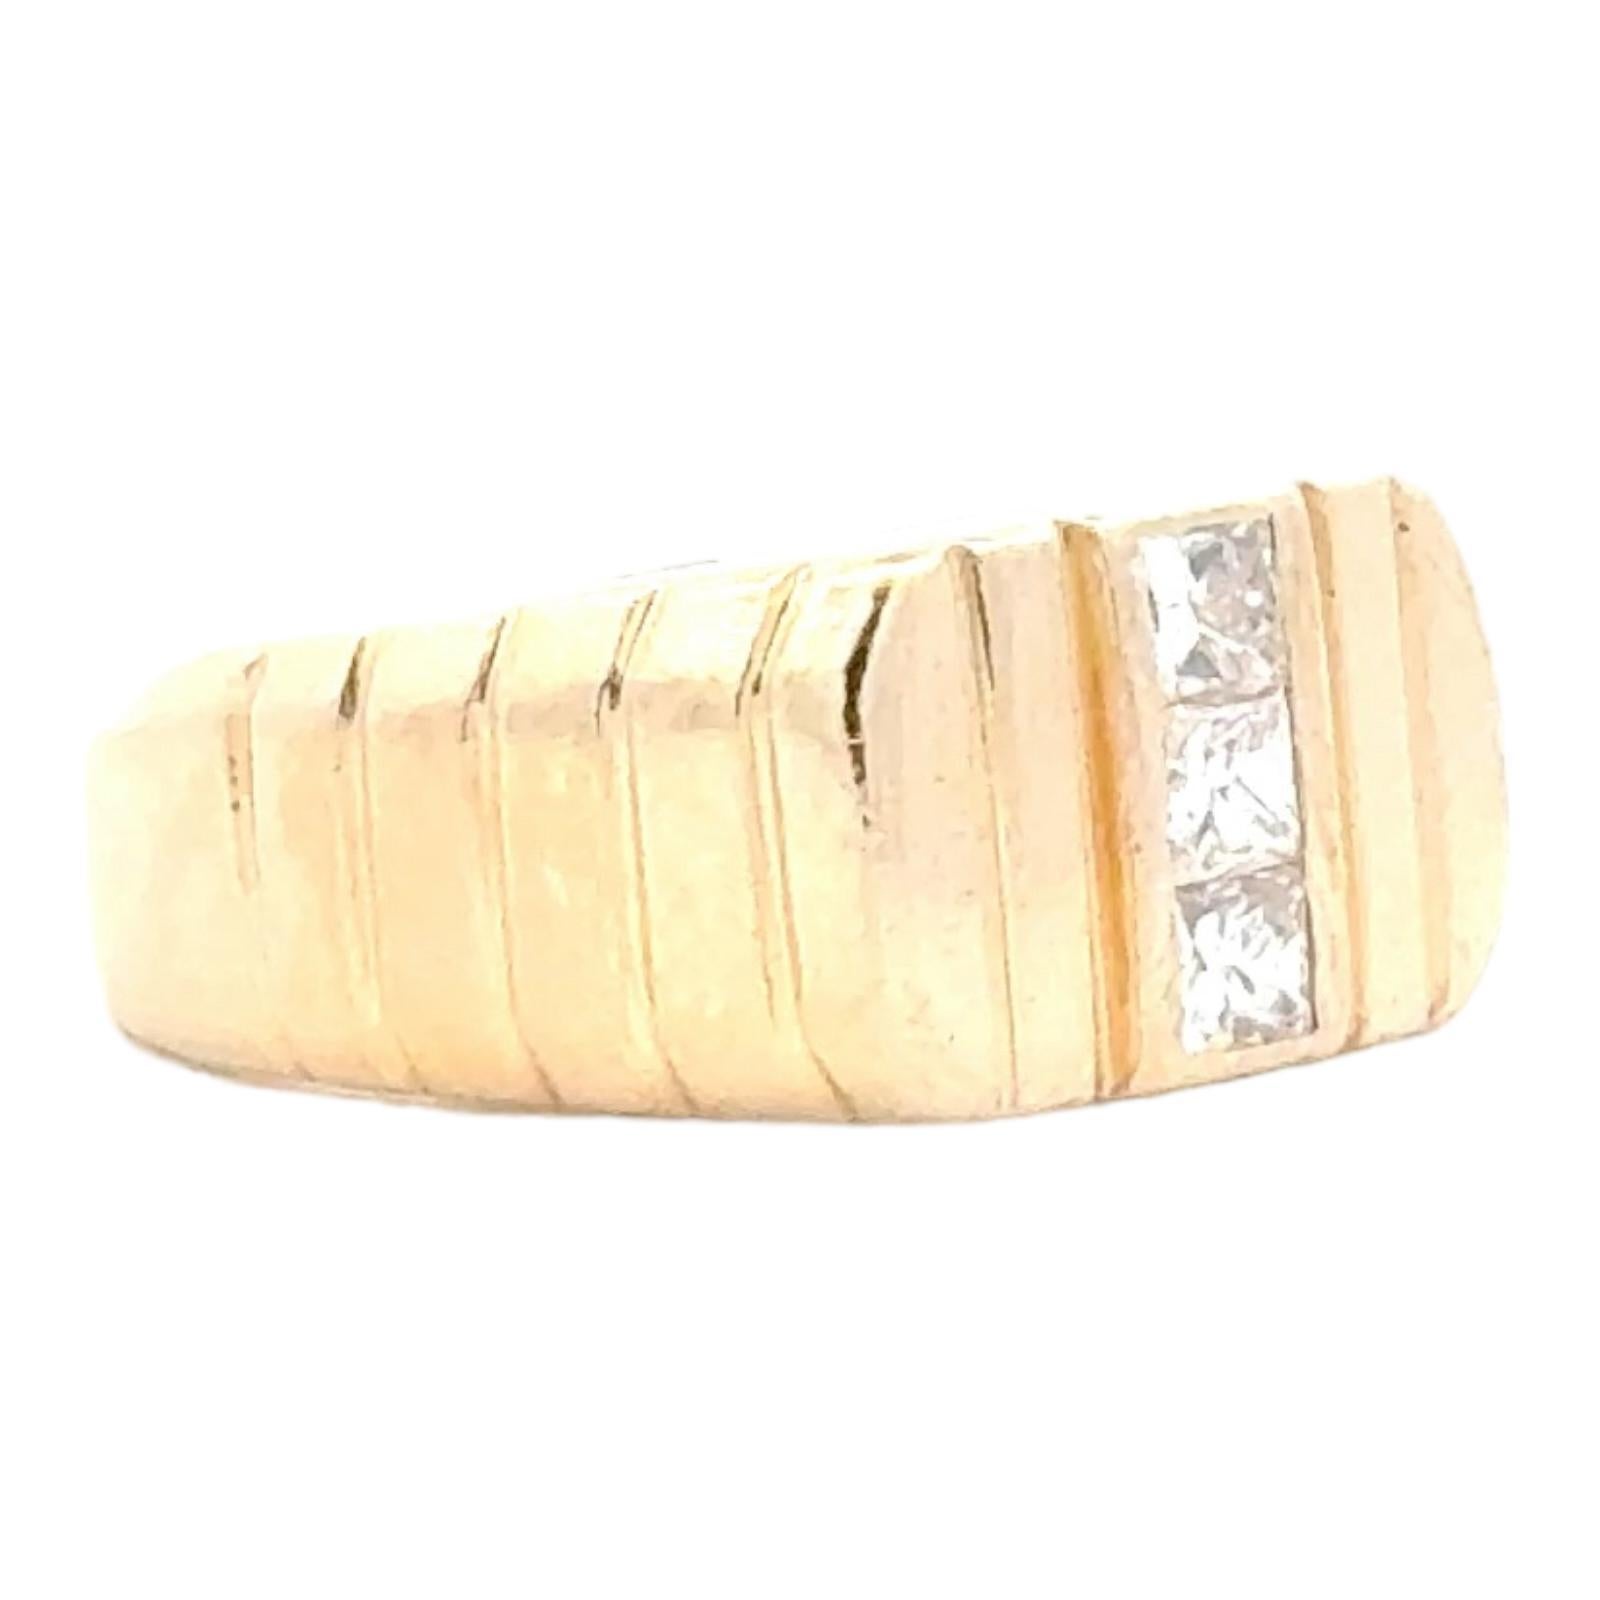 Three diamond band ring fashioned in 14 karat yellow gold. The ring features 3 princess cut diamonds weighing approximately .50 carat total weight and graded G-H color and VS clarity. The band measures 5-9mm in width and is size 7 (can be sized).